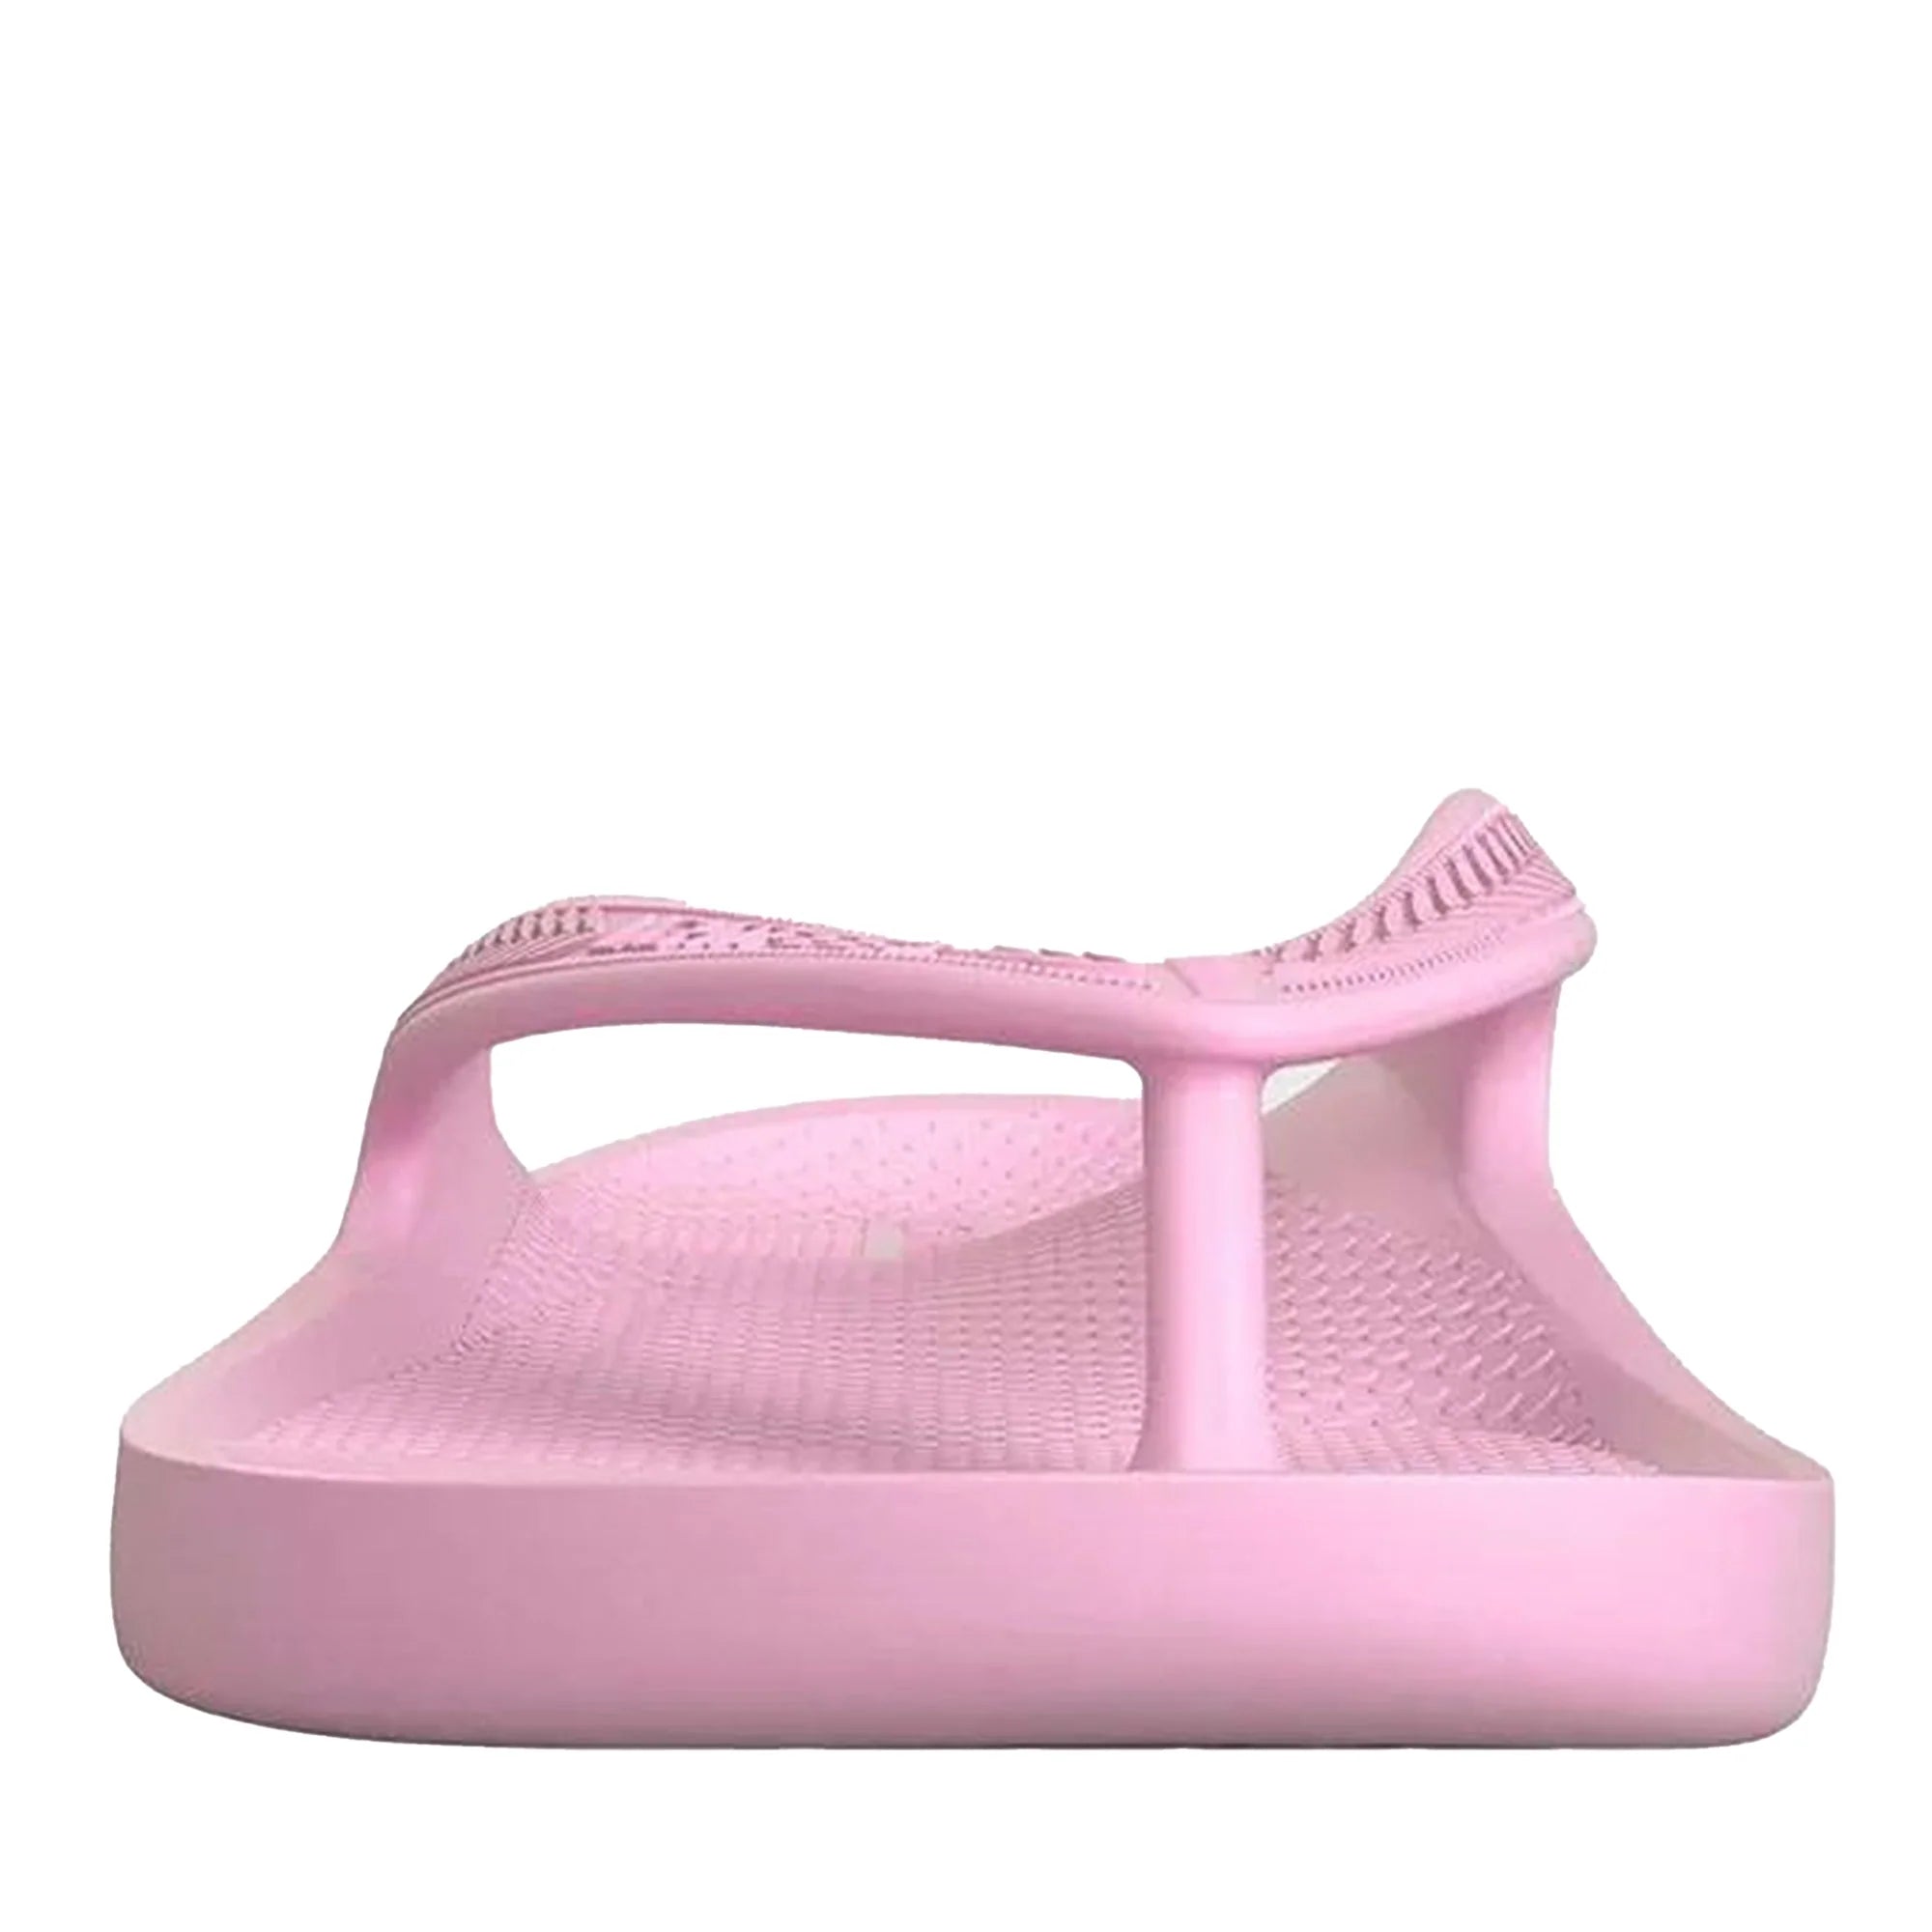 Arch Support Flip Flops - Classic - Pink